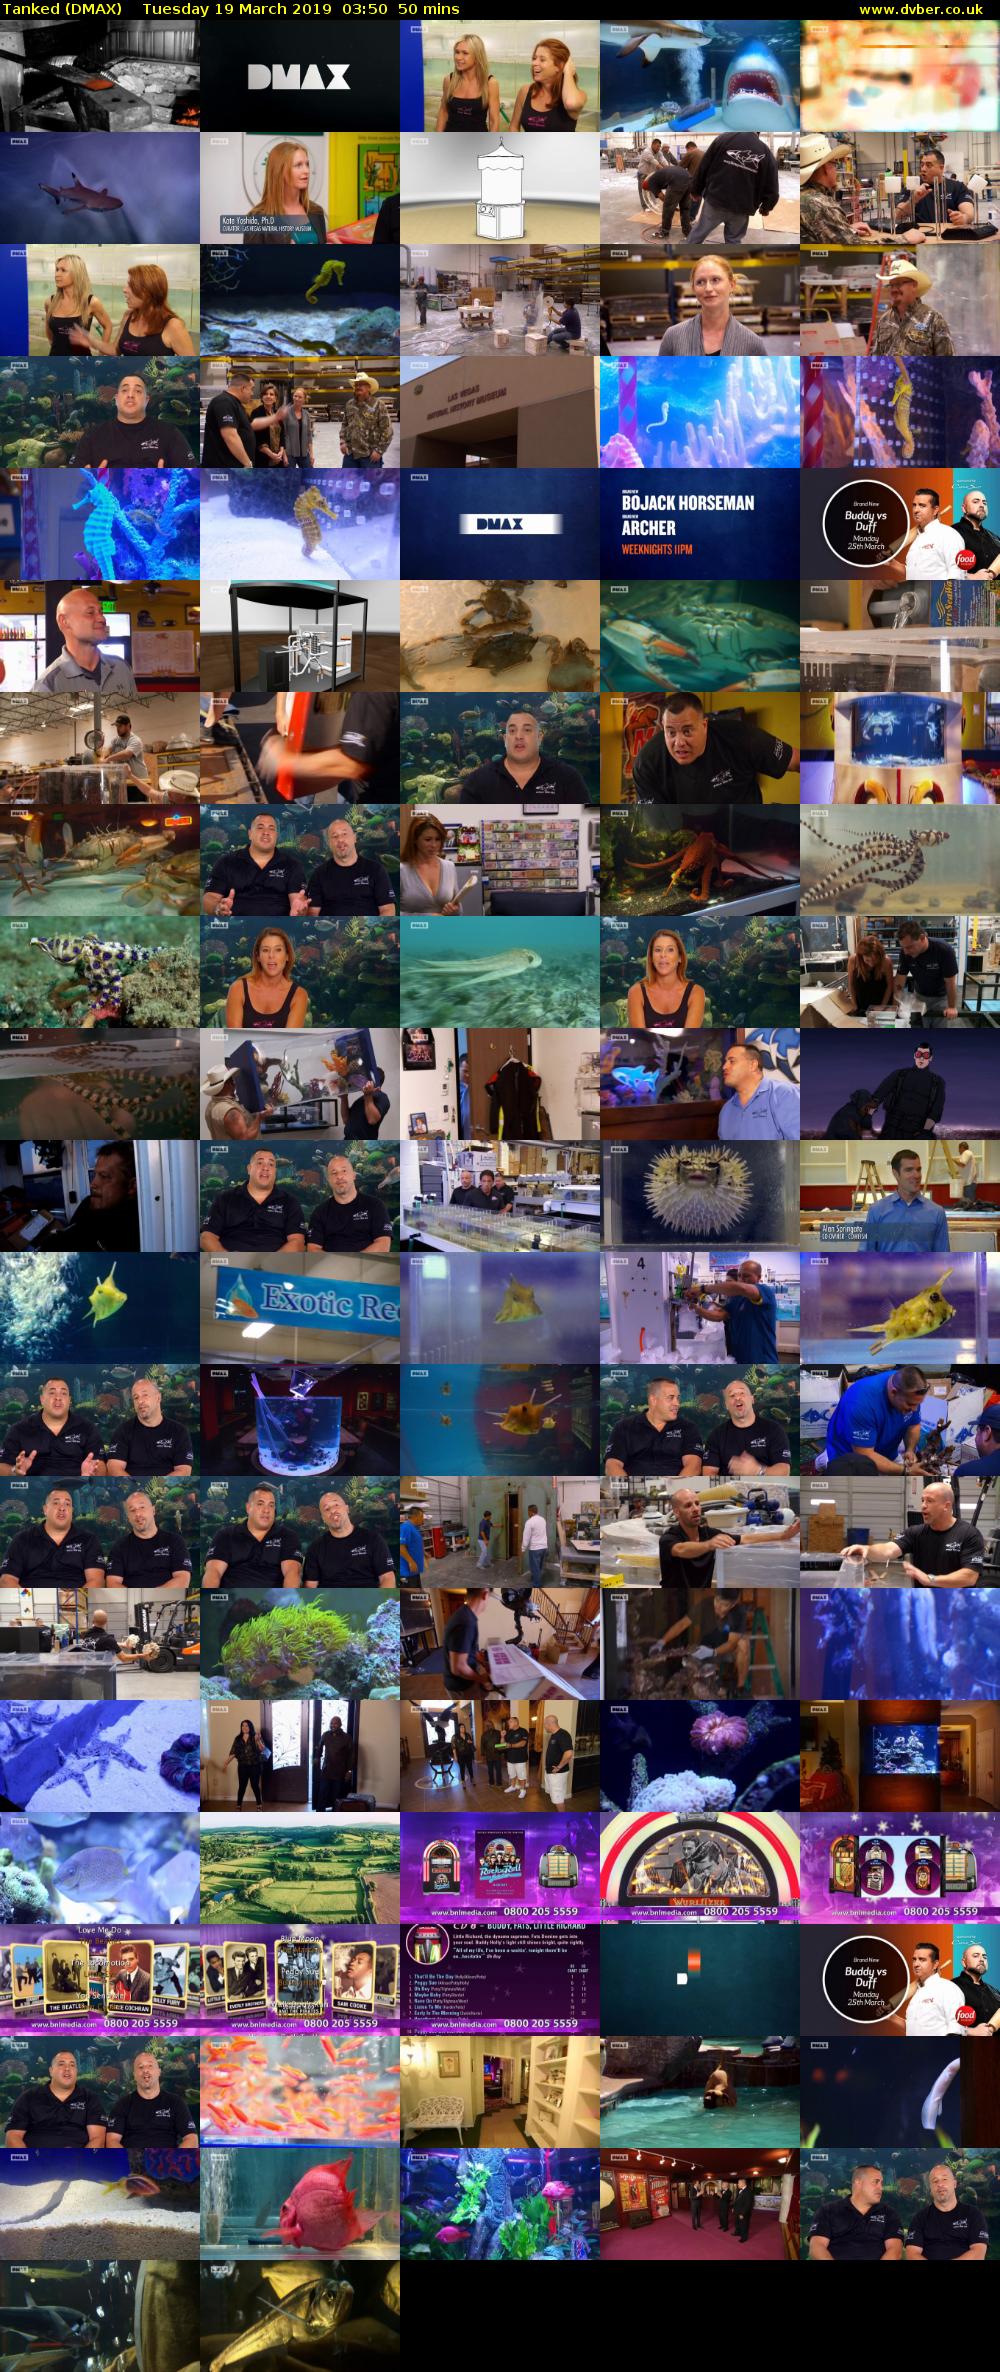 Tanked (DMAX) Tuesday 19 March 2019 03:50 - 04:40